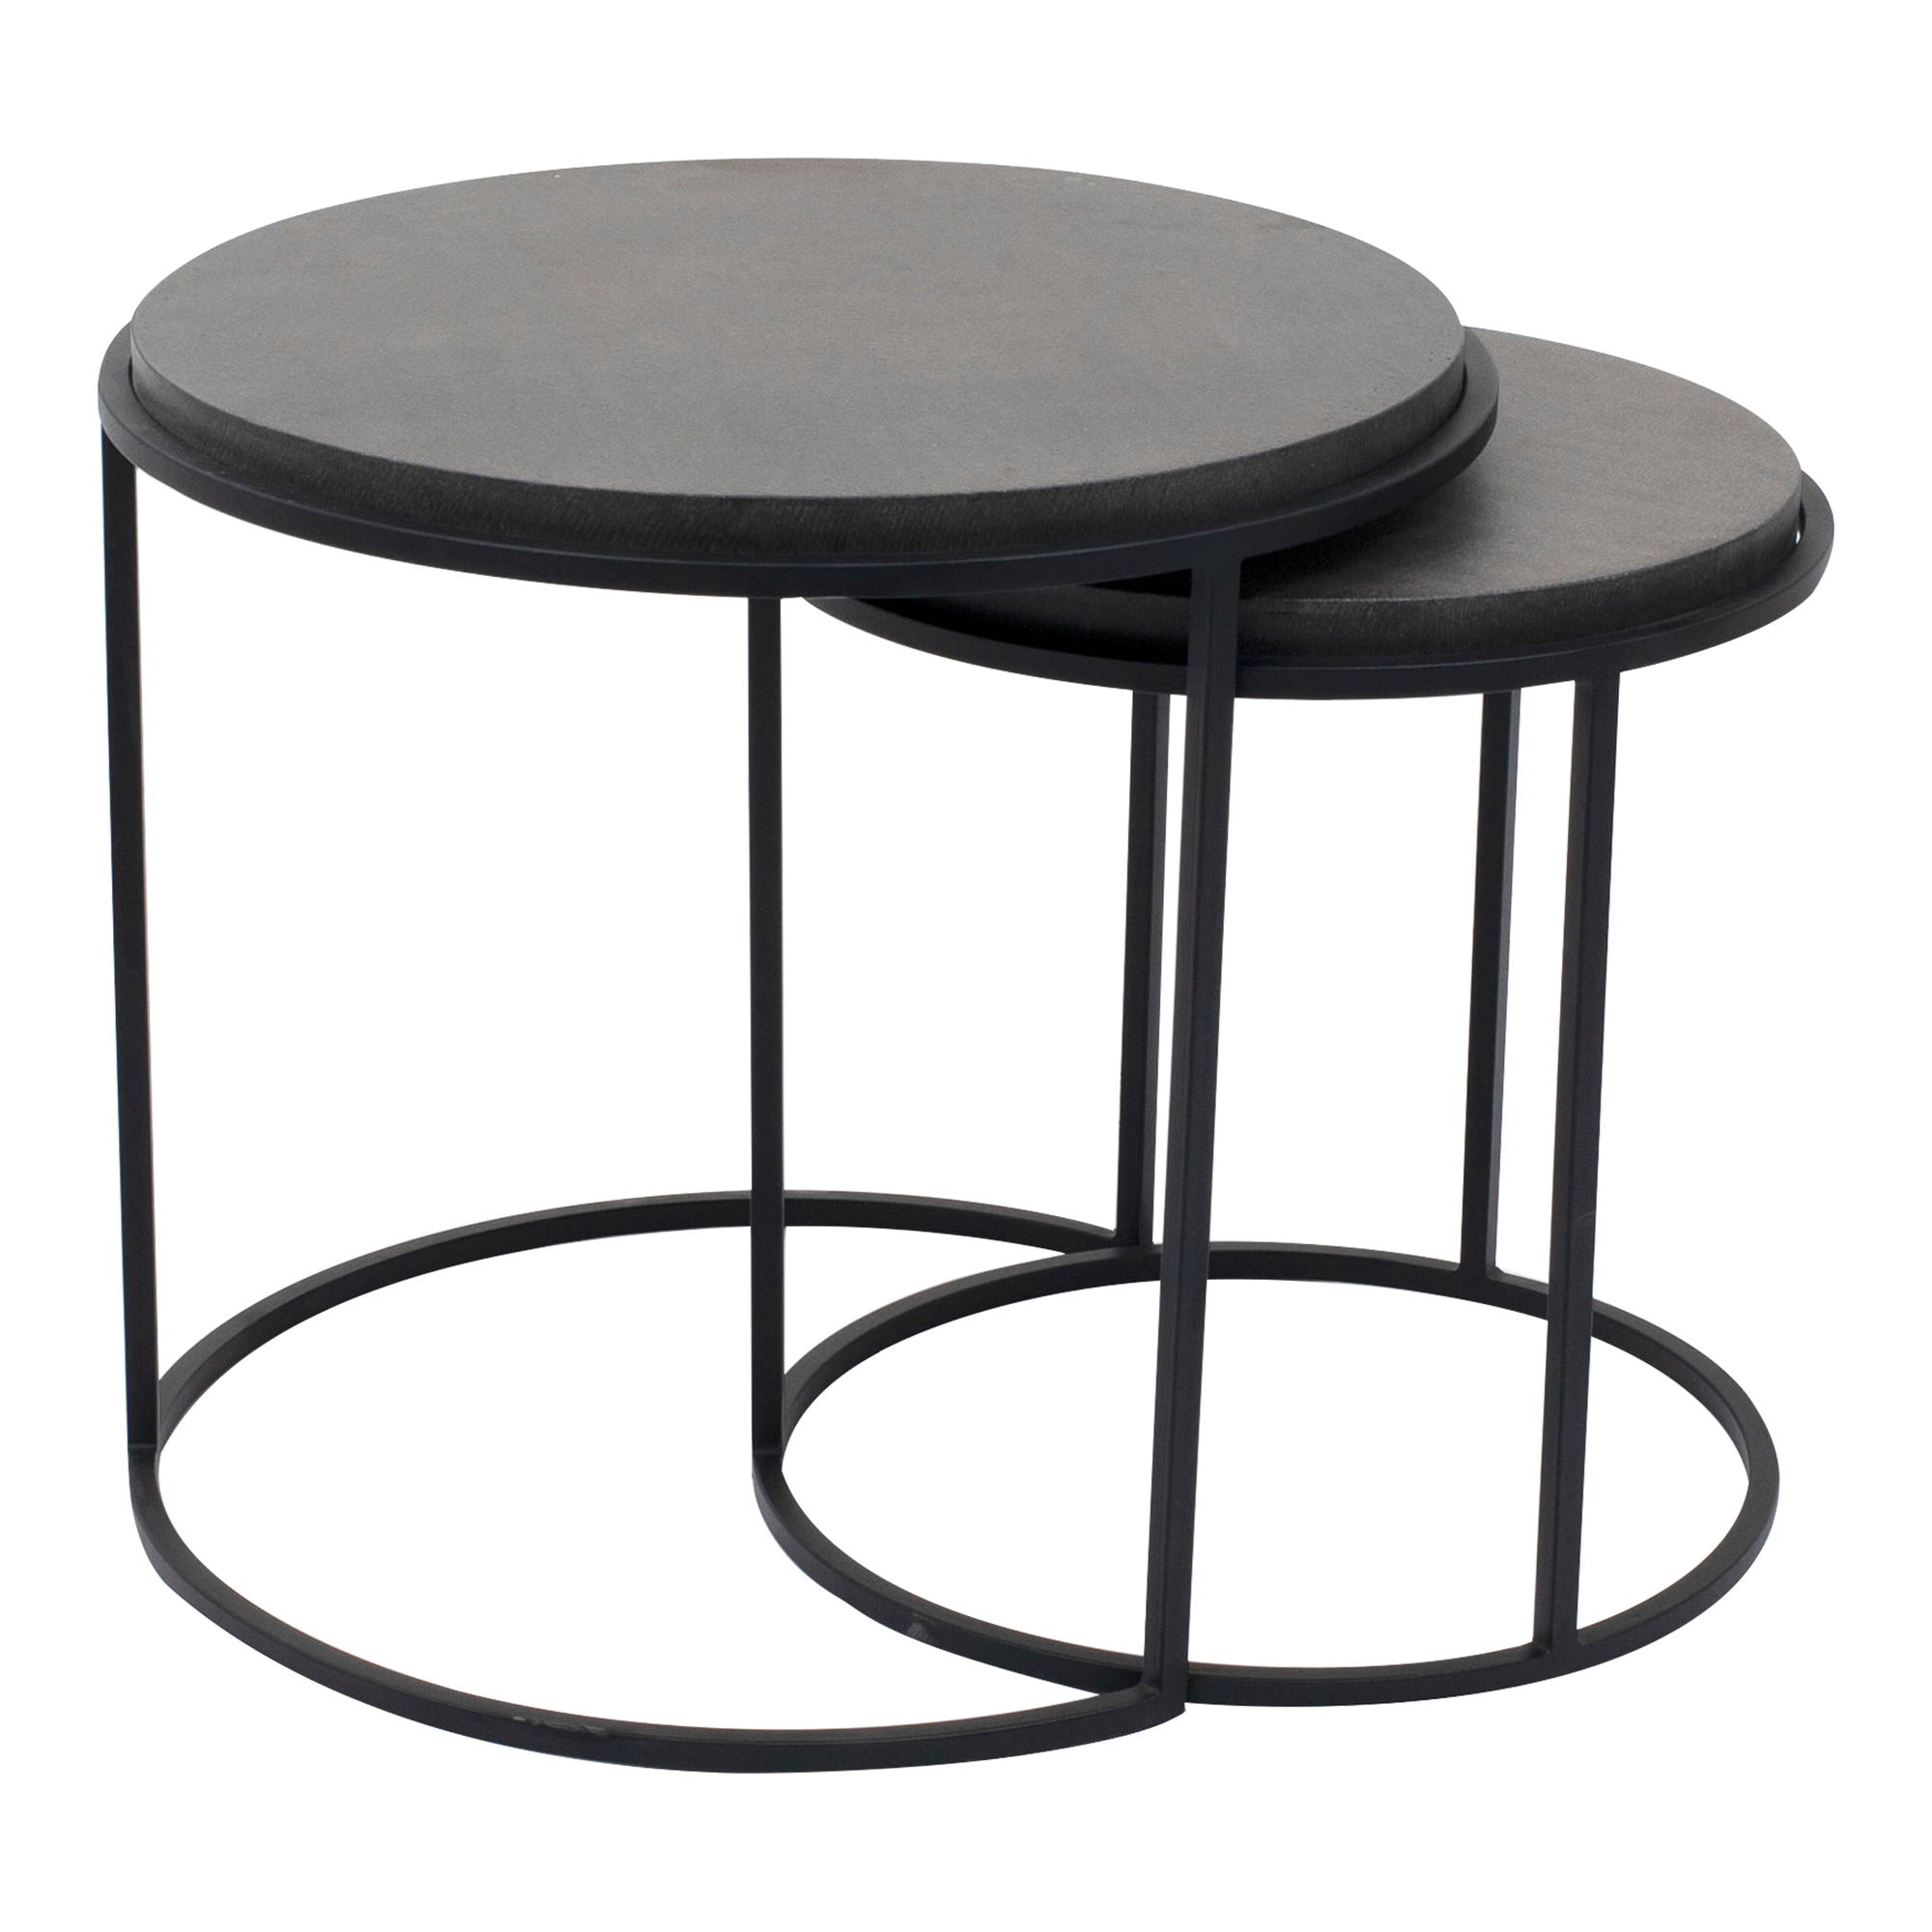 Roost - Nesting Tables (Set of 2) - Black